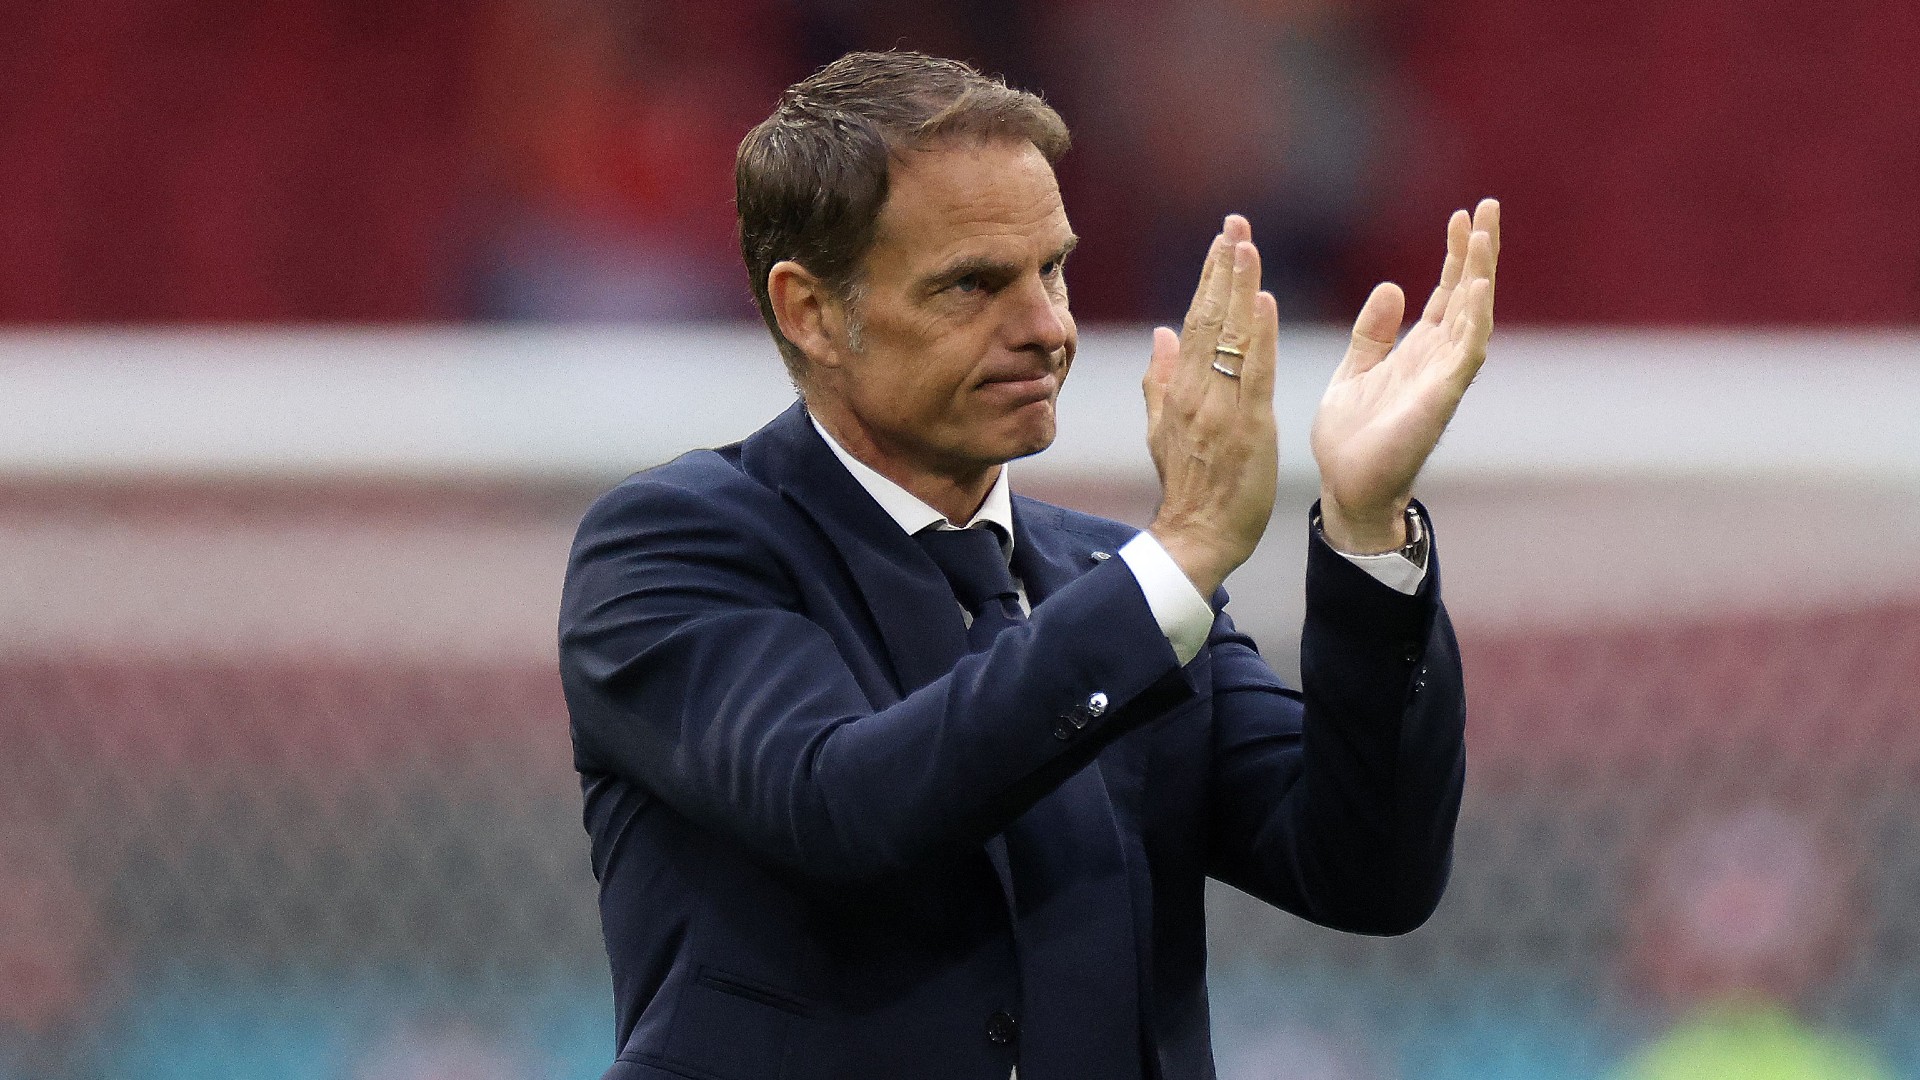 De Boer steps down as Netherlands head coach following disappointing Euro 2020 campaign